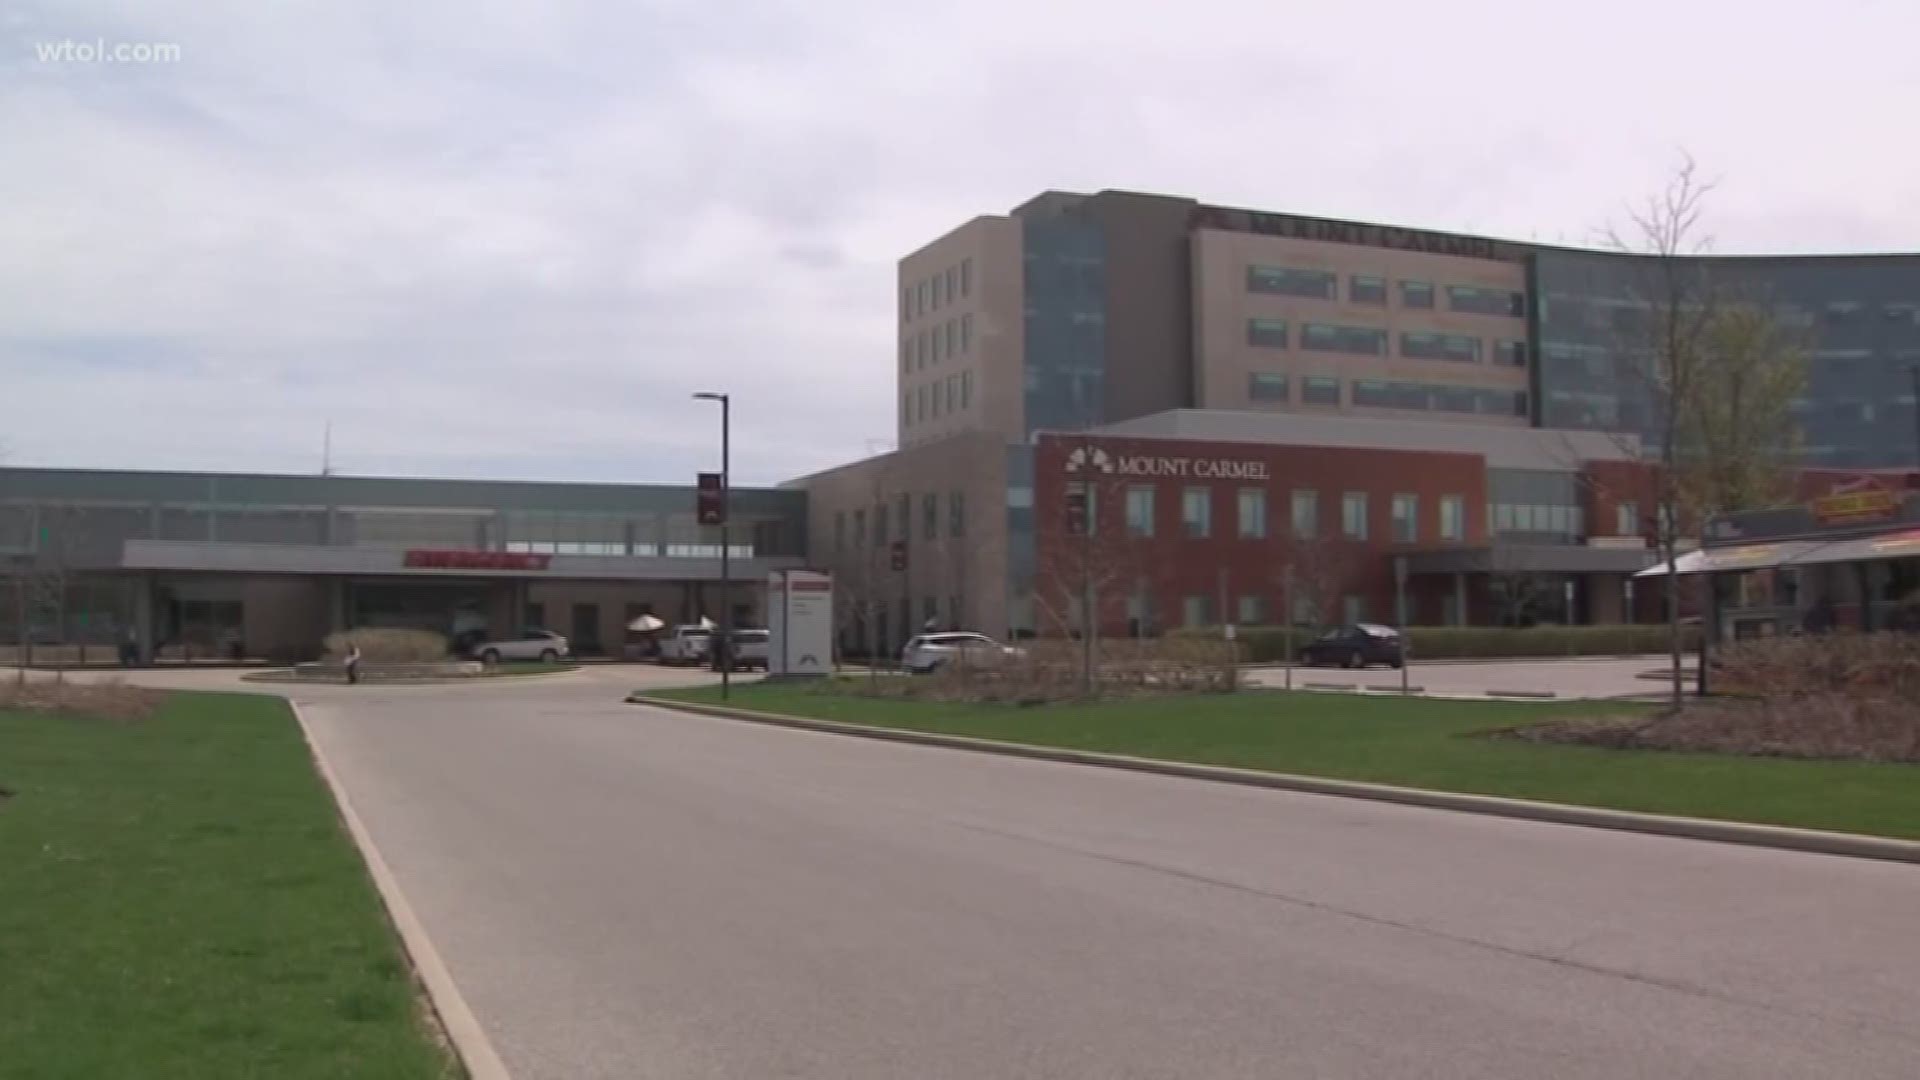 An Ohio patient has died amid an outbreak of Legionnaires' disease in a recently opened hospital, authorities said.